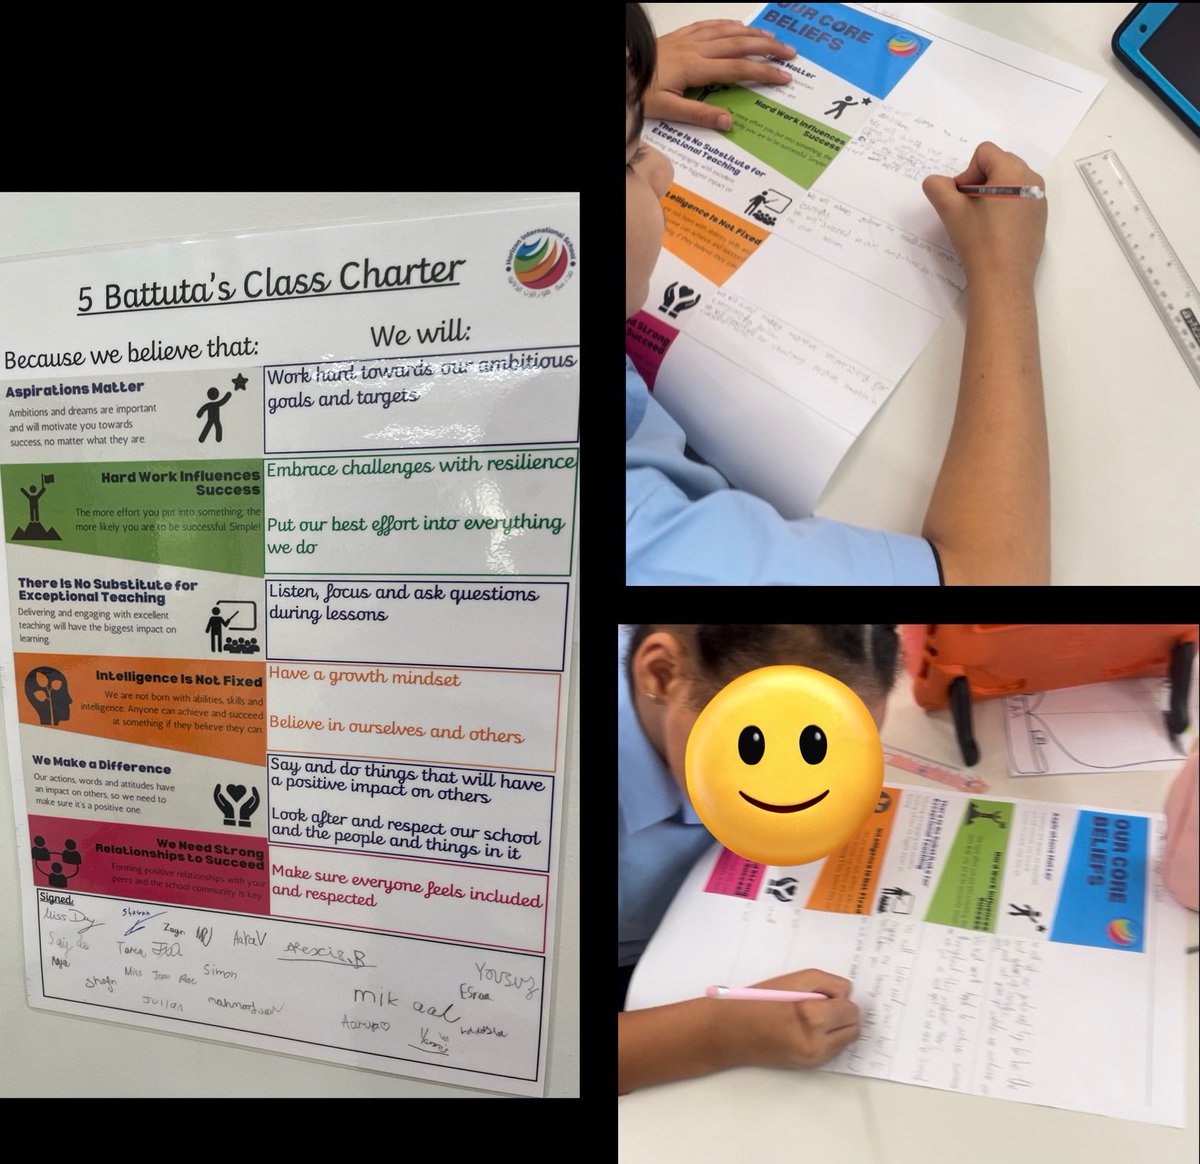 This week we have been creating our class charter based on our @HISDubai Core Beliefs. At this point in time, everyone in 5 Battuta is in agreement and on board! #everyonecounts #everyonecontributes #everyonesucceeds